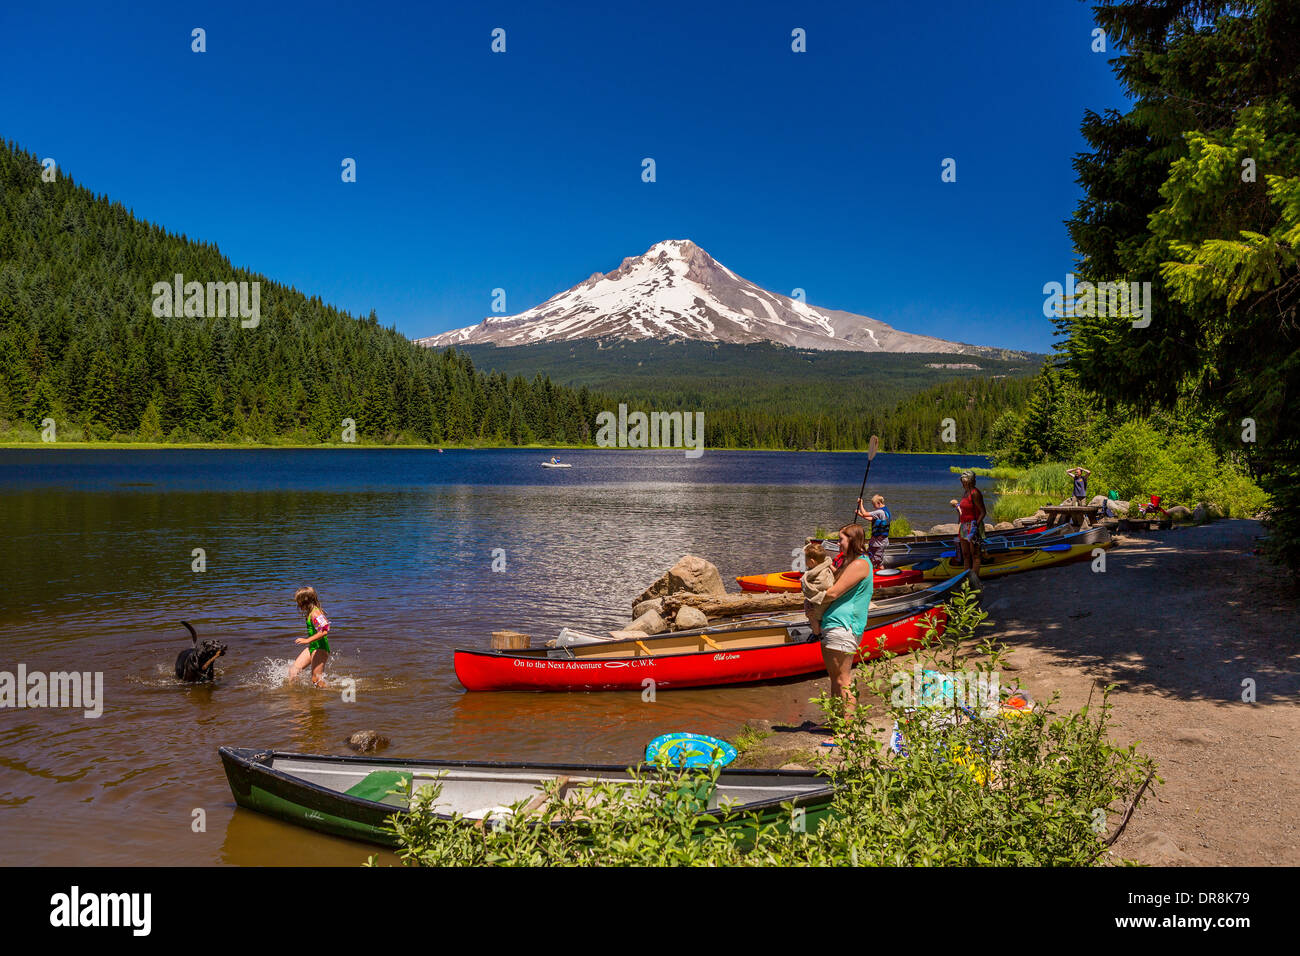 GOVERNMENT CAMP,OREGON, USA - People, canoes and kayaks at Trillium Lake, and Mount Hood. Stock Photo